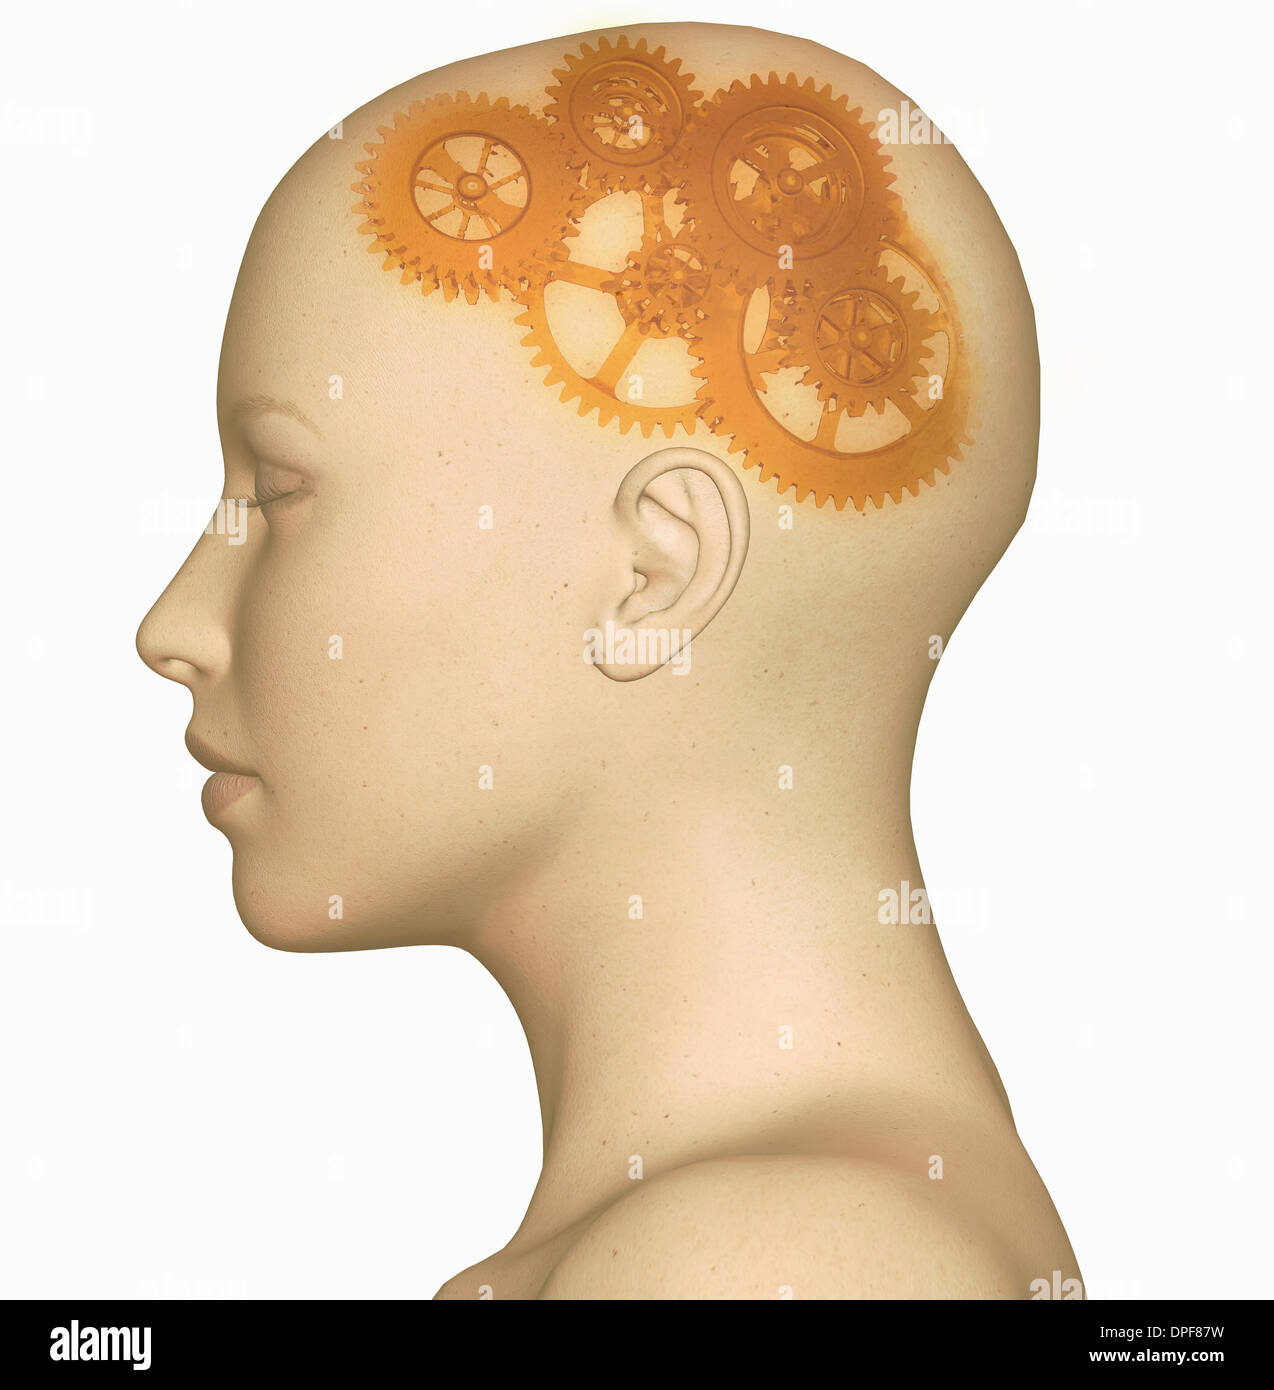 Illustration of female human head with gears Stock Photo